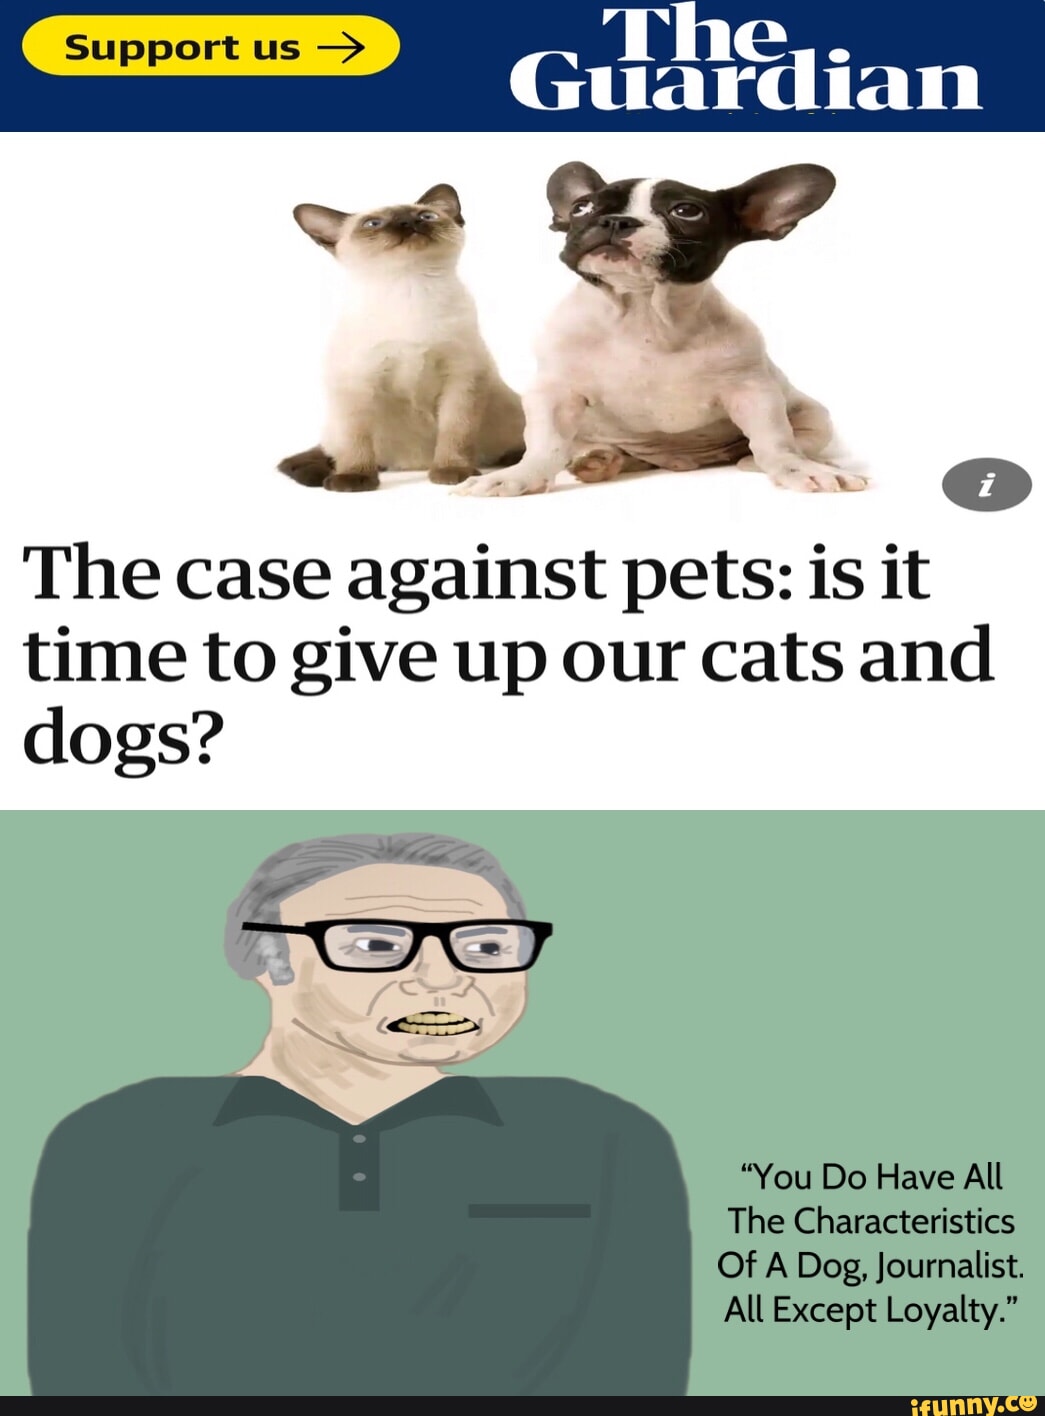 The case against pets: is it time to give up our cats and dogs?, Pets